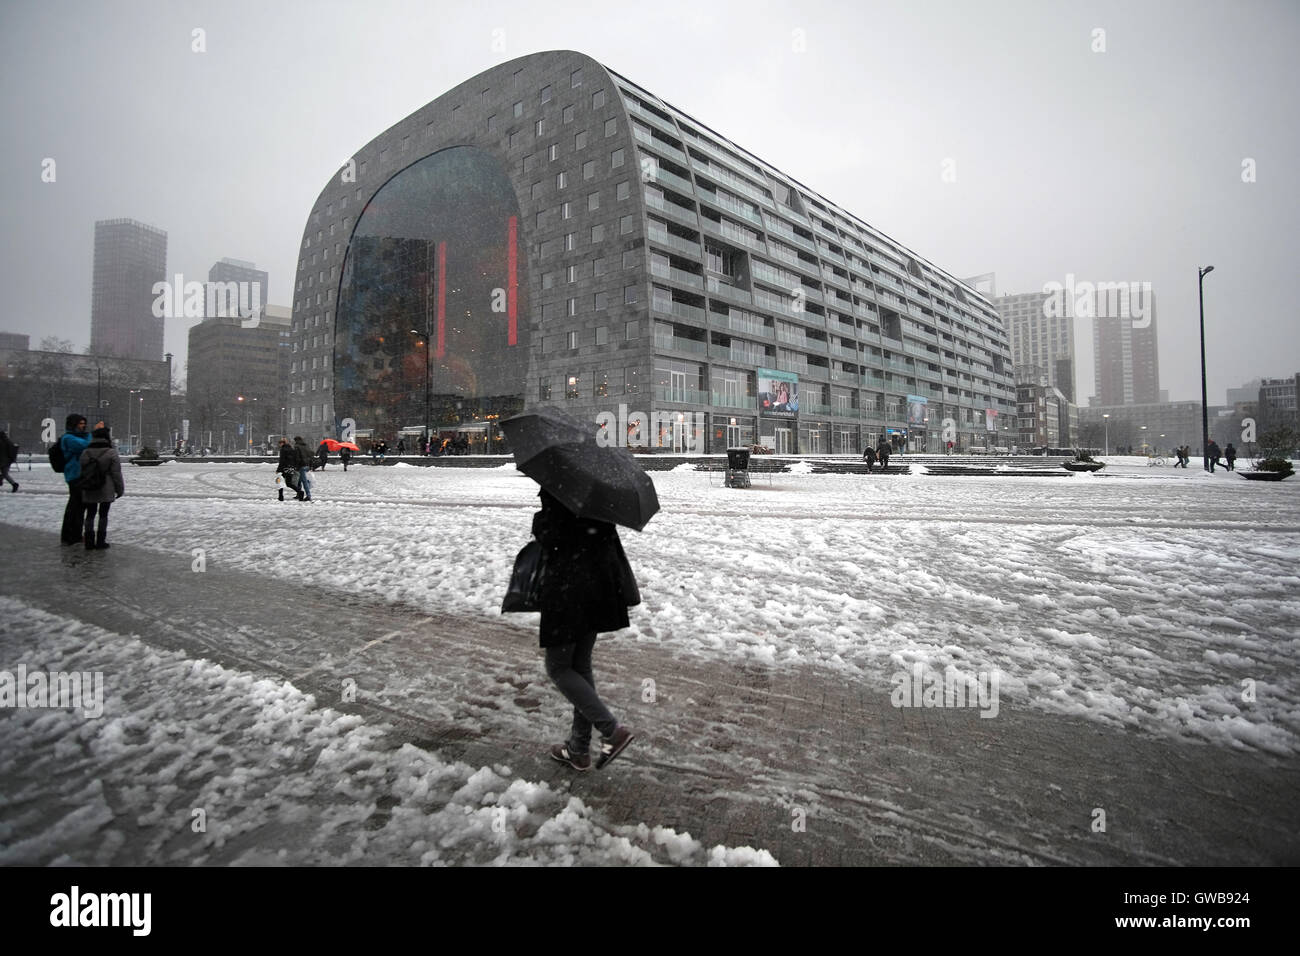 Rotterdam's Marktal on a cold snowy winter's day a shopper rushes with their black umbrella Stock Photo